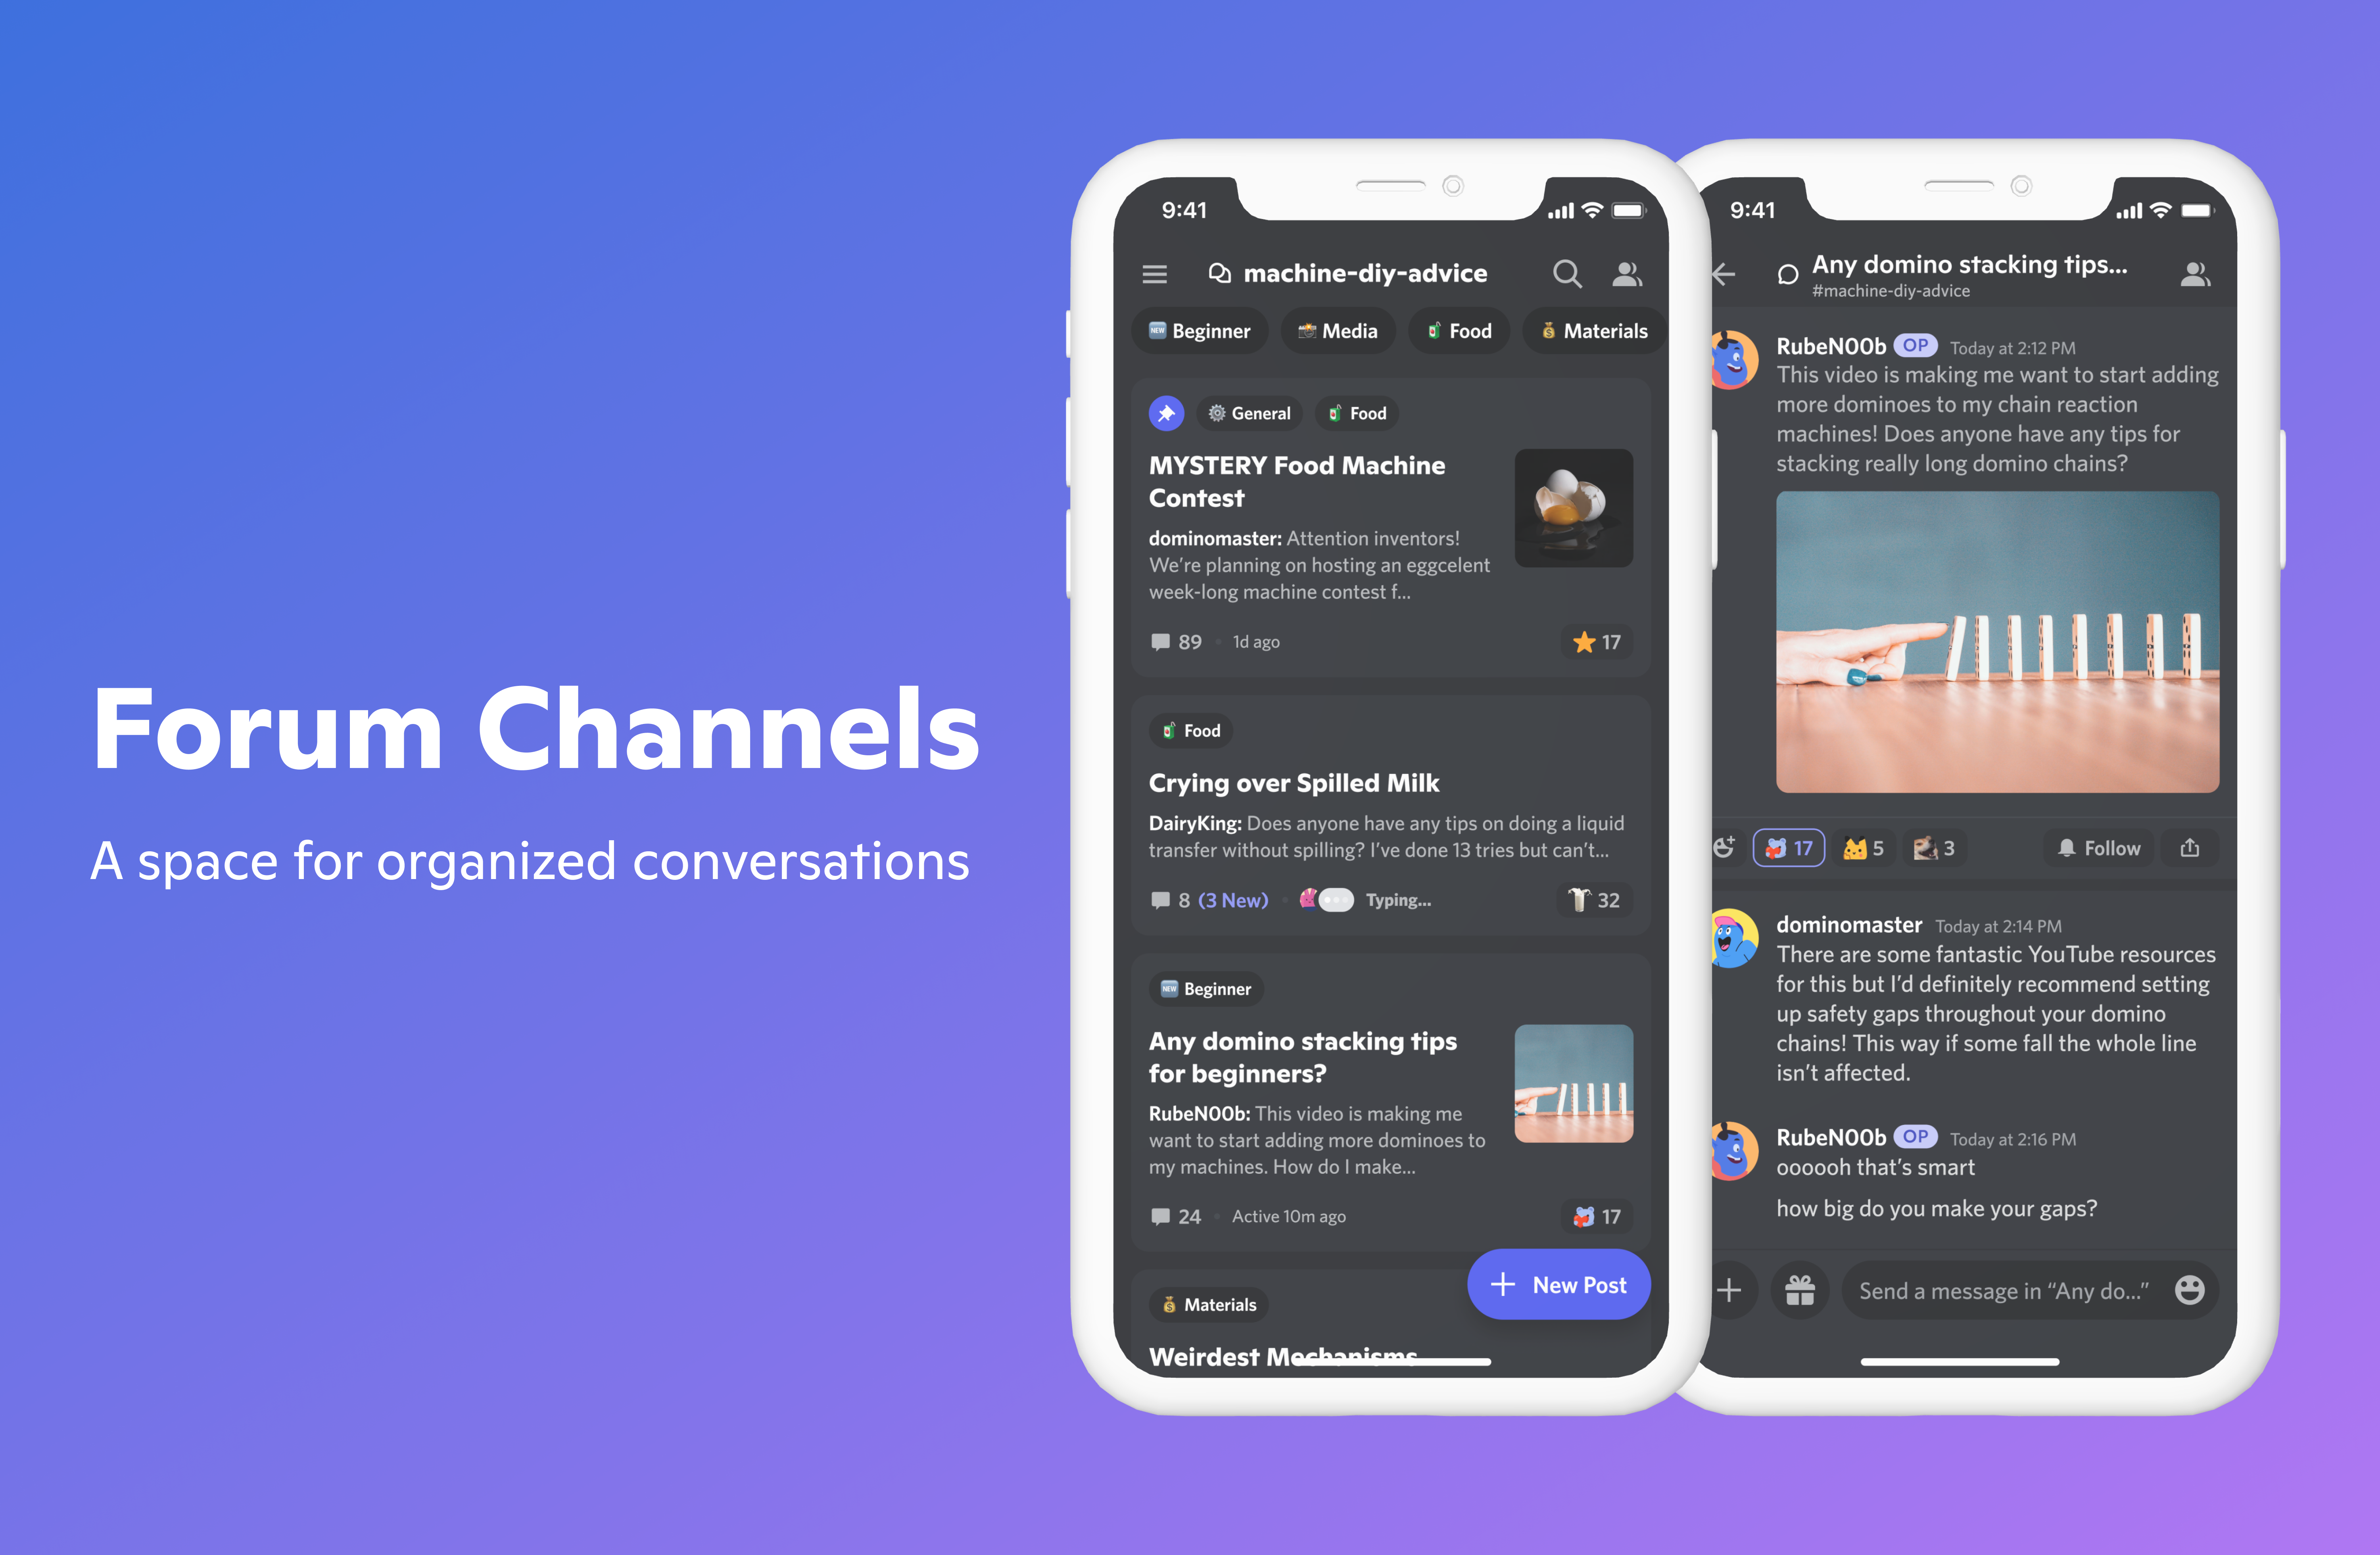 Discord’s Forum Channels on a mobile device, showing how conversations are organized using this new feature